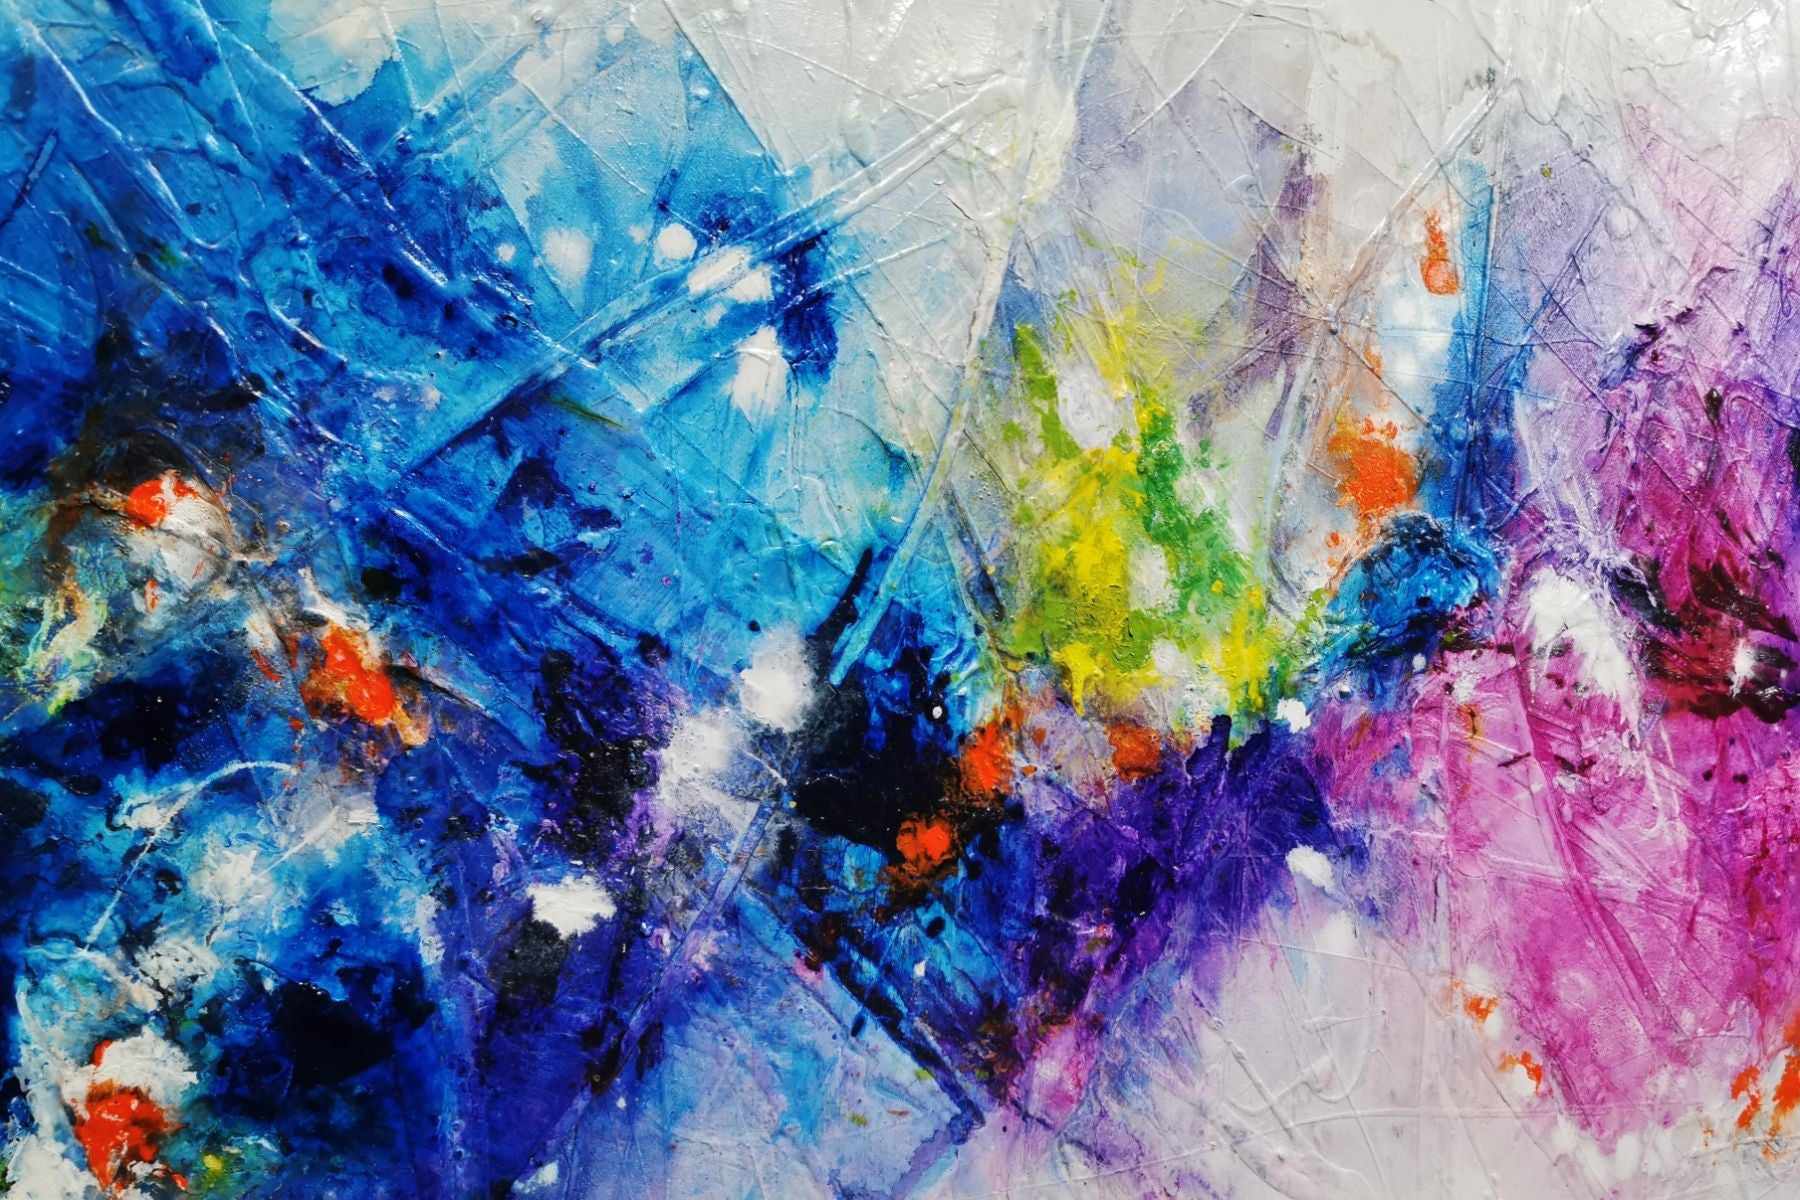 Pink and Blue Candy Surprise 200cm x 80cm Colourful Textured Abstract Painting (SOLD)